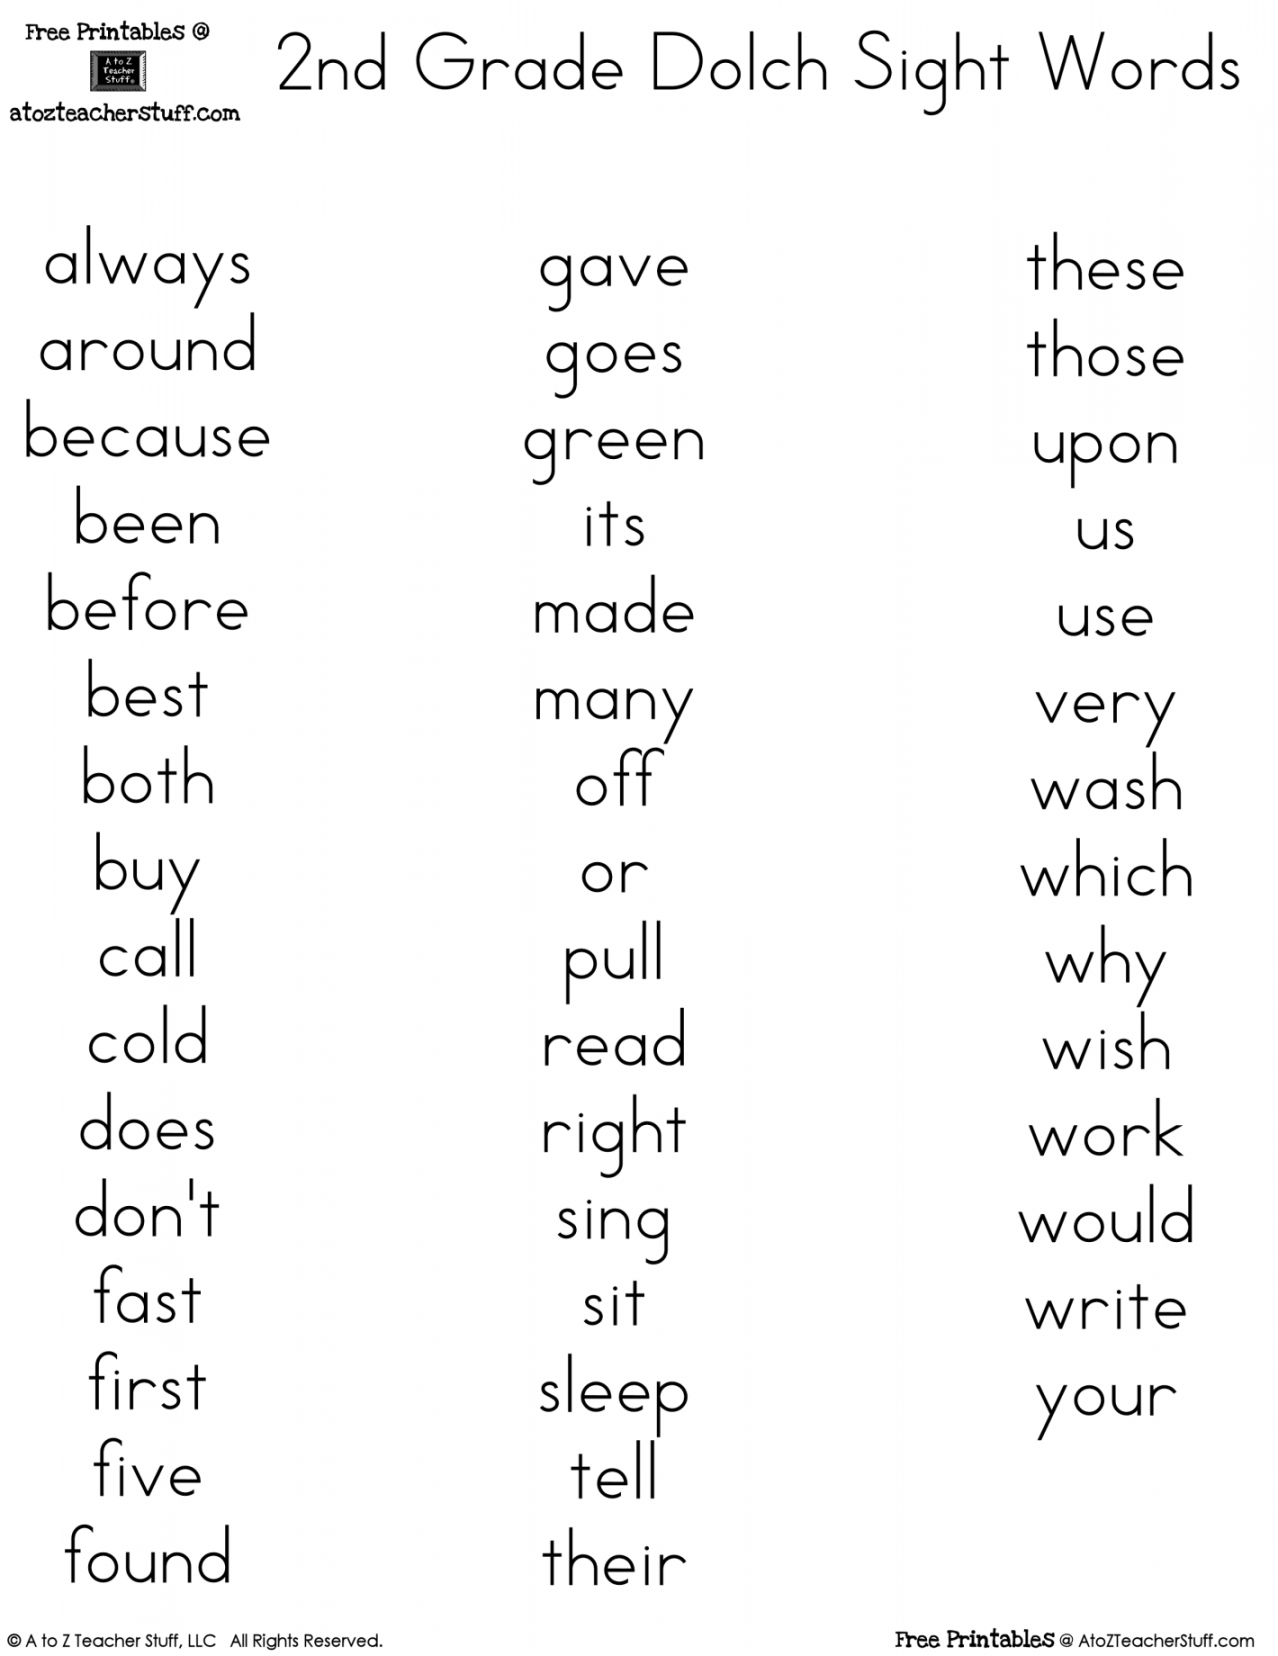 Second Grade Dolch Sight Word Printables  A to Z Teacher Stuff  - FREE Printables - Free Printable 2nd Grade Sight Words